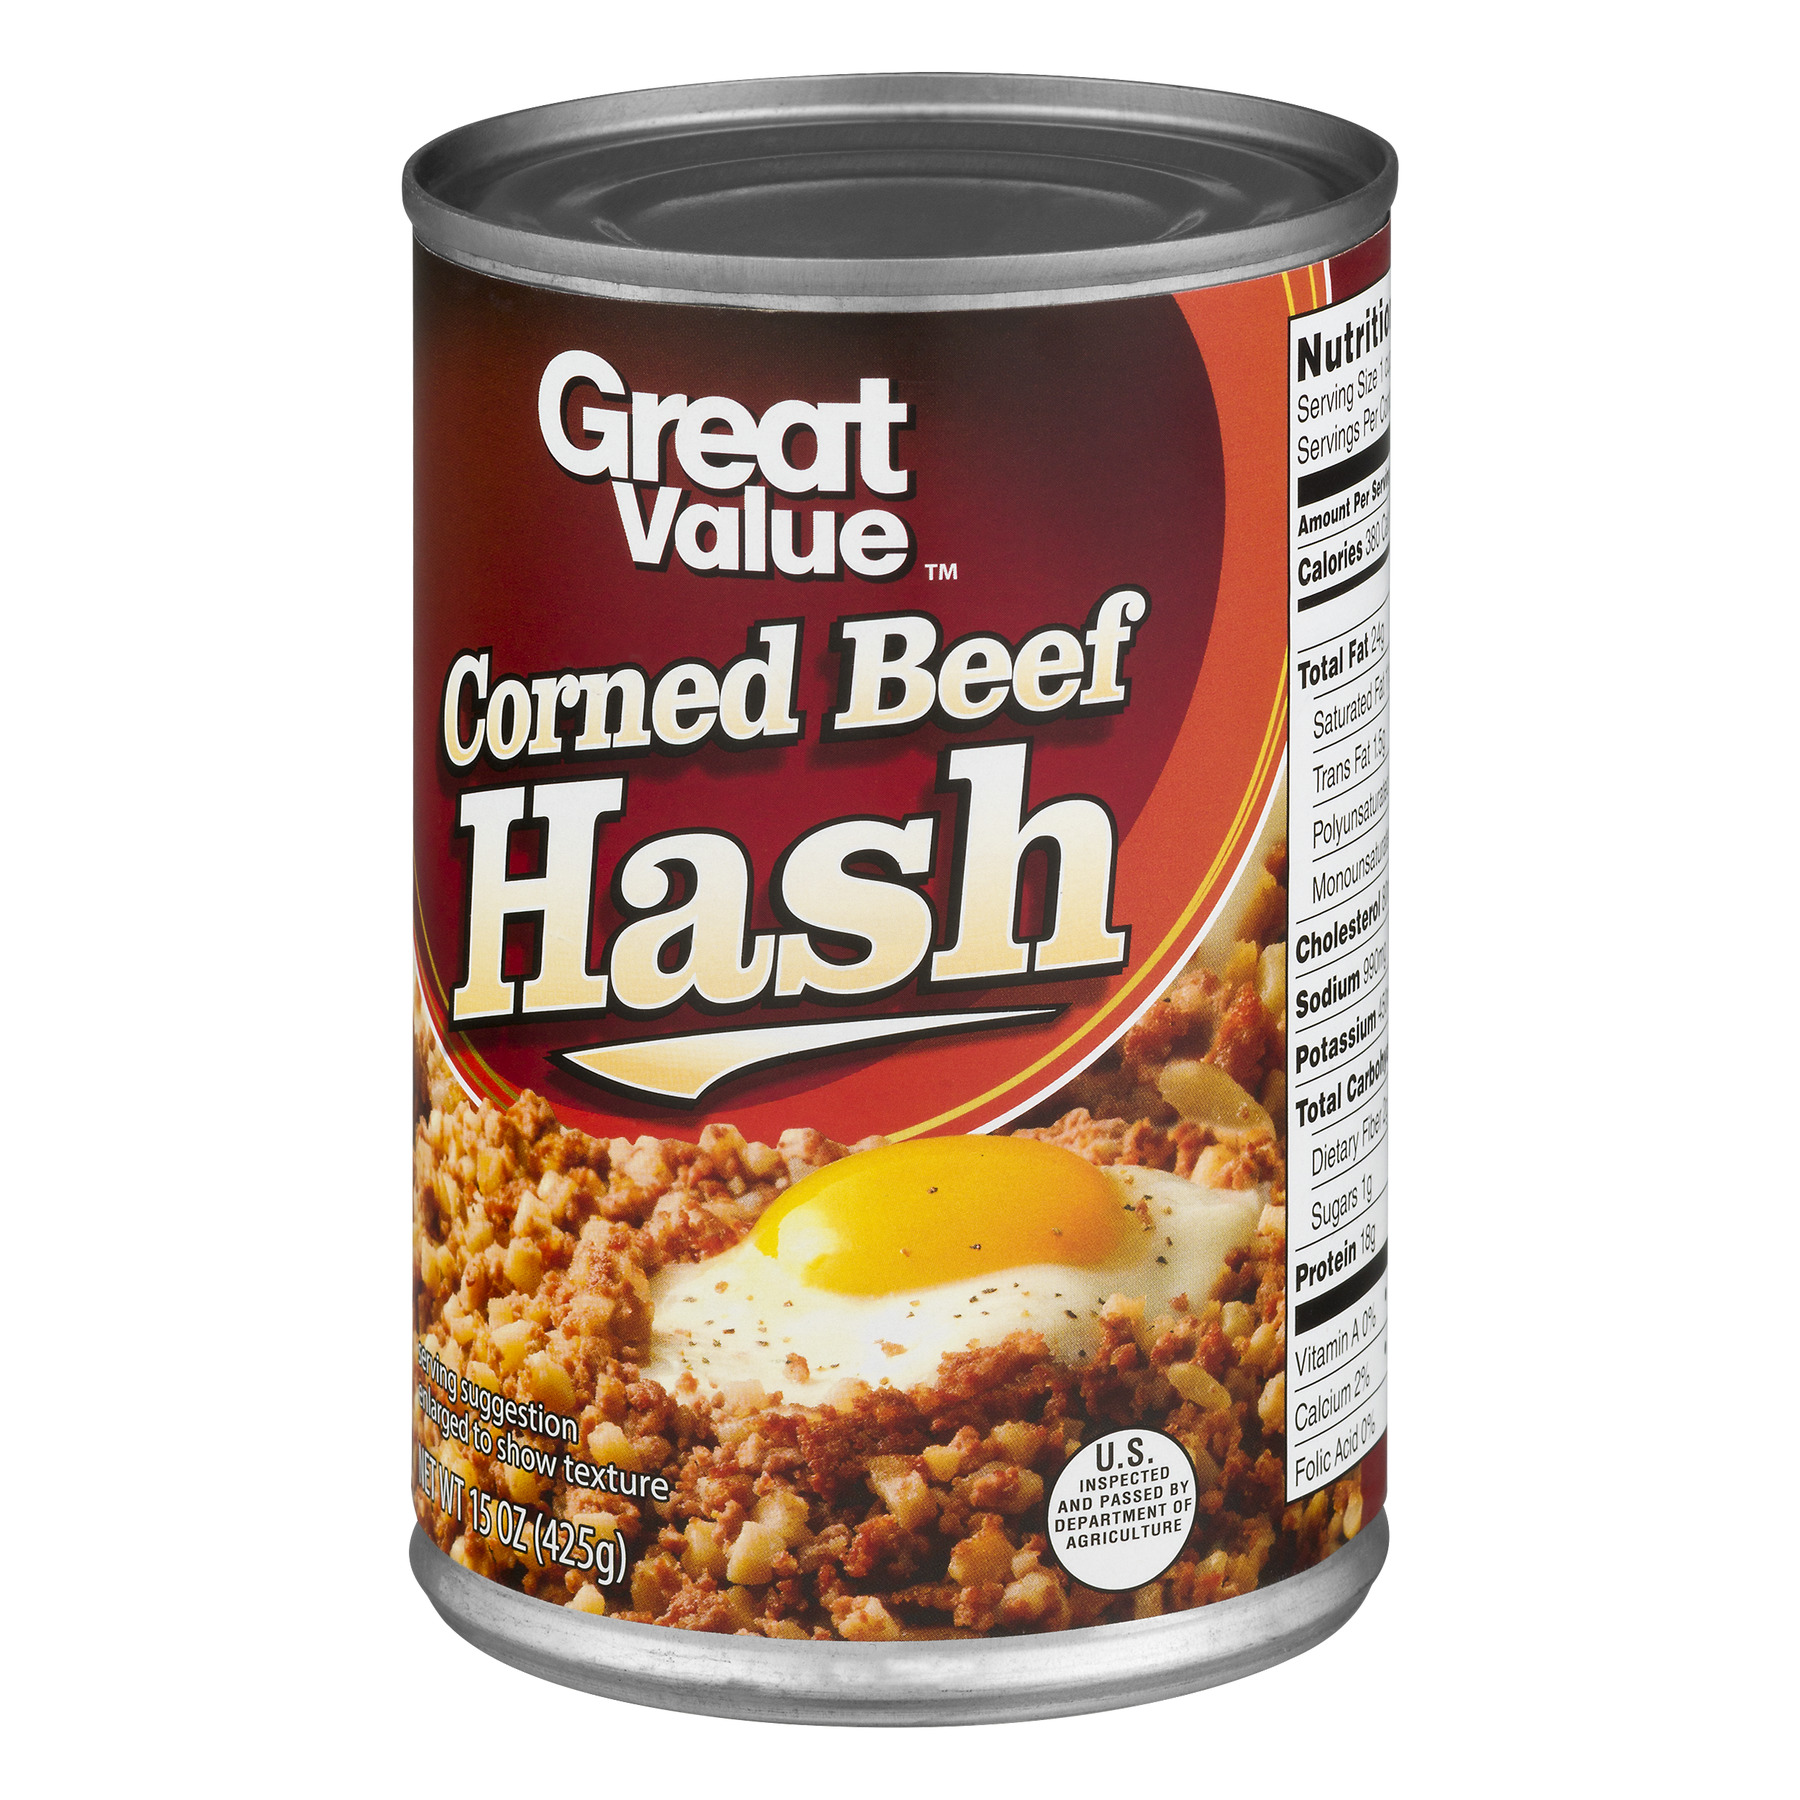 Great Value Corned Beef Hash, 15 oz Can - image 3 of 9